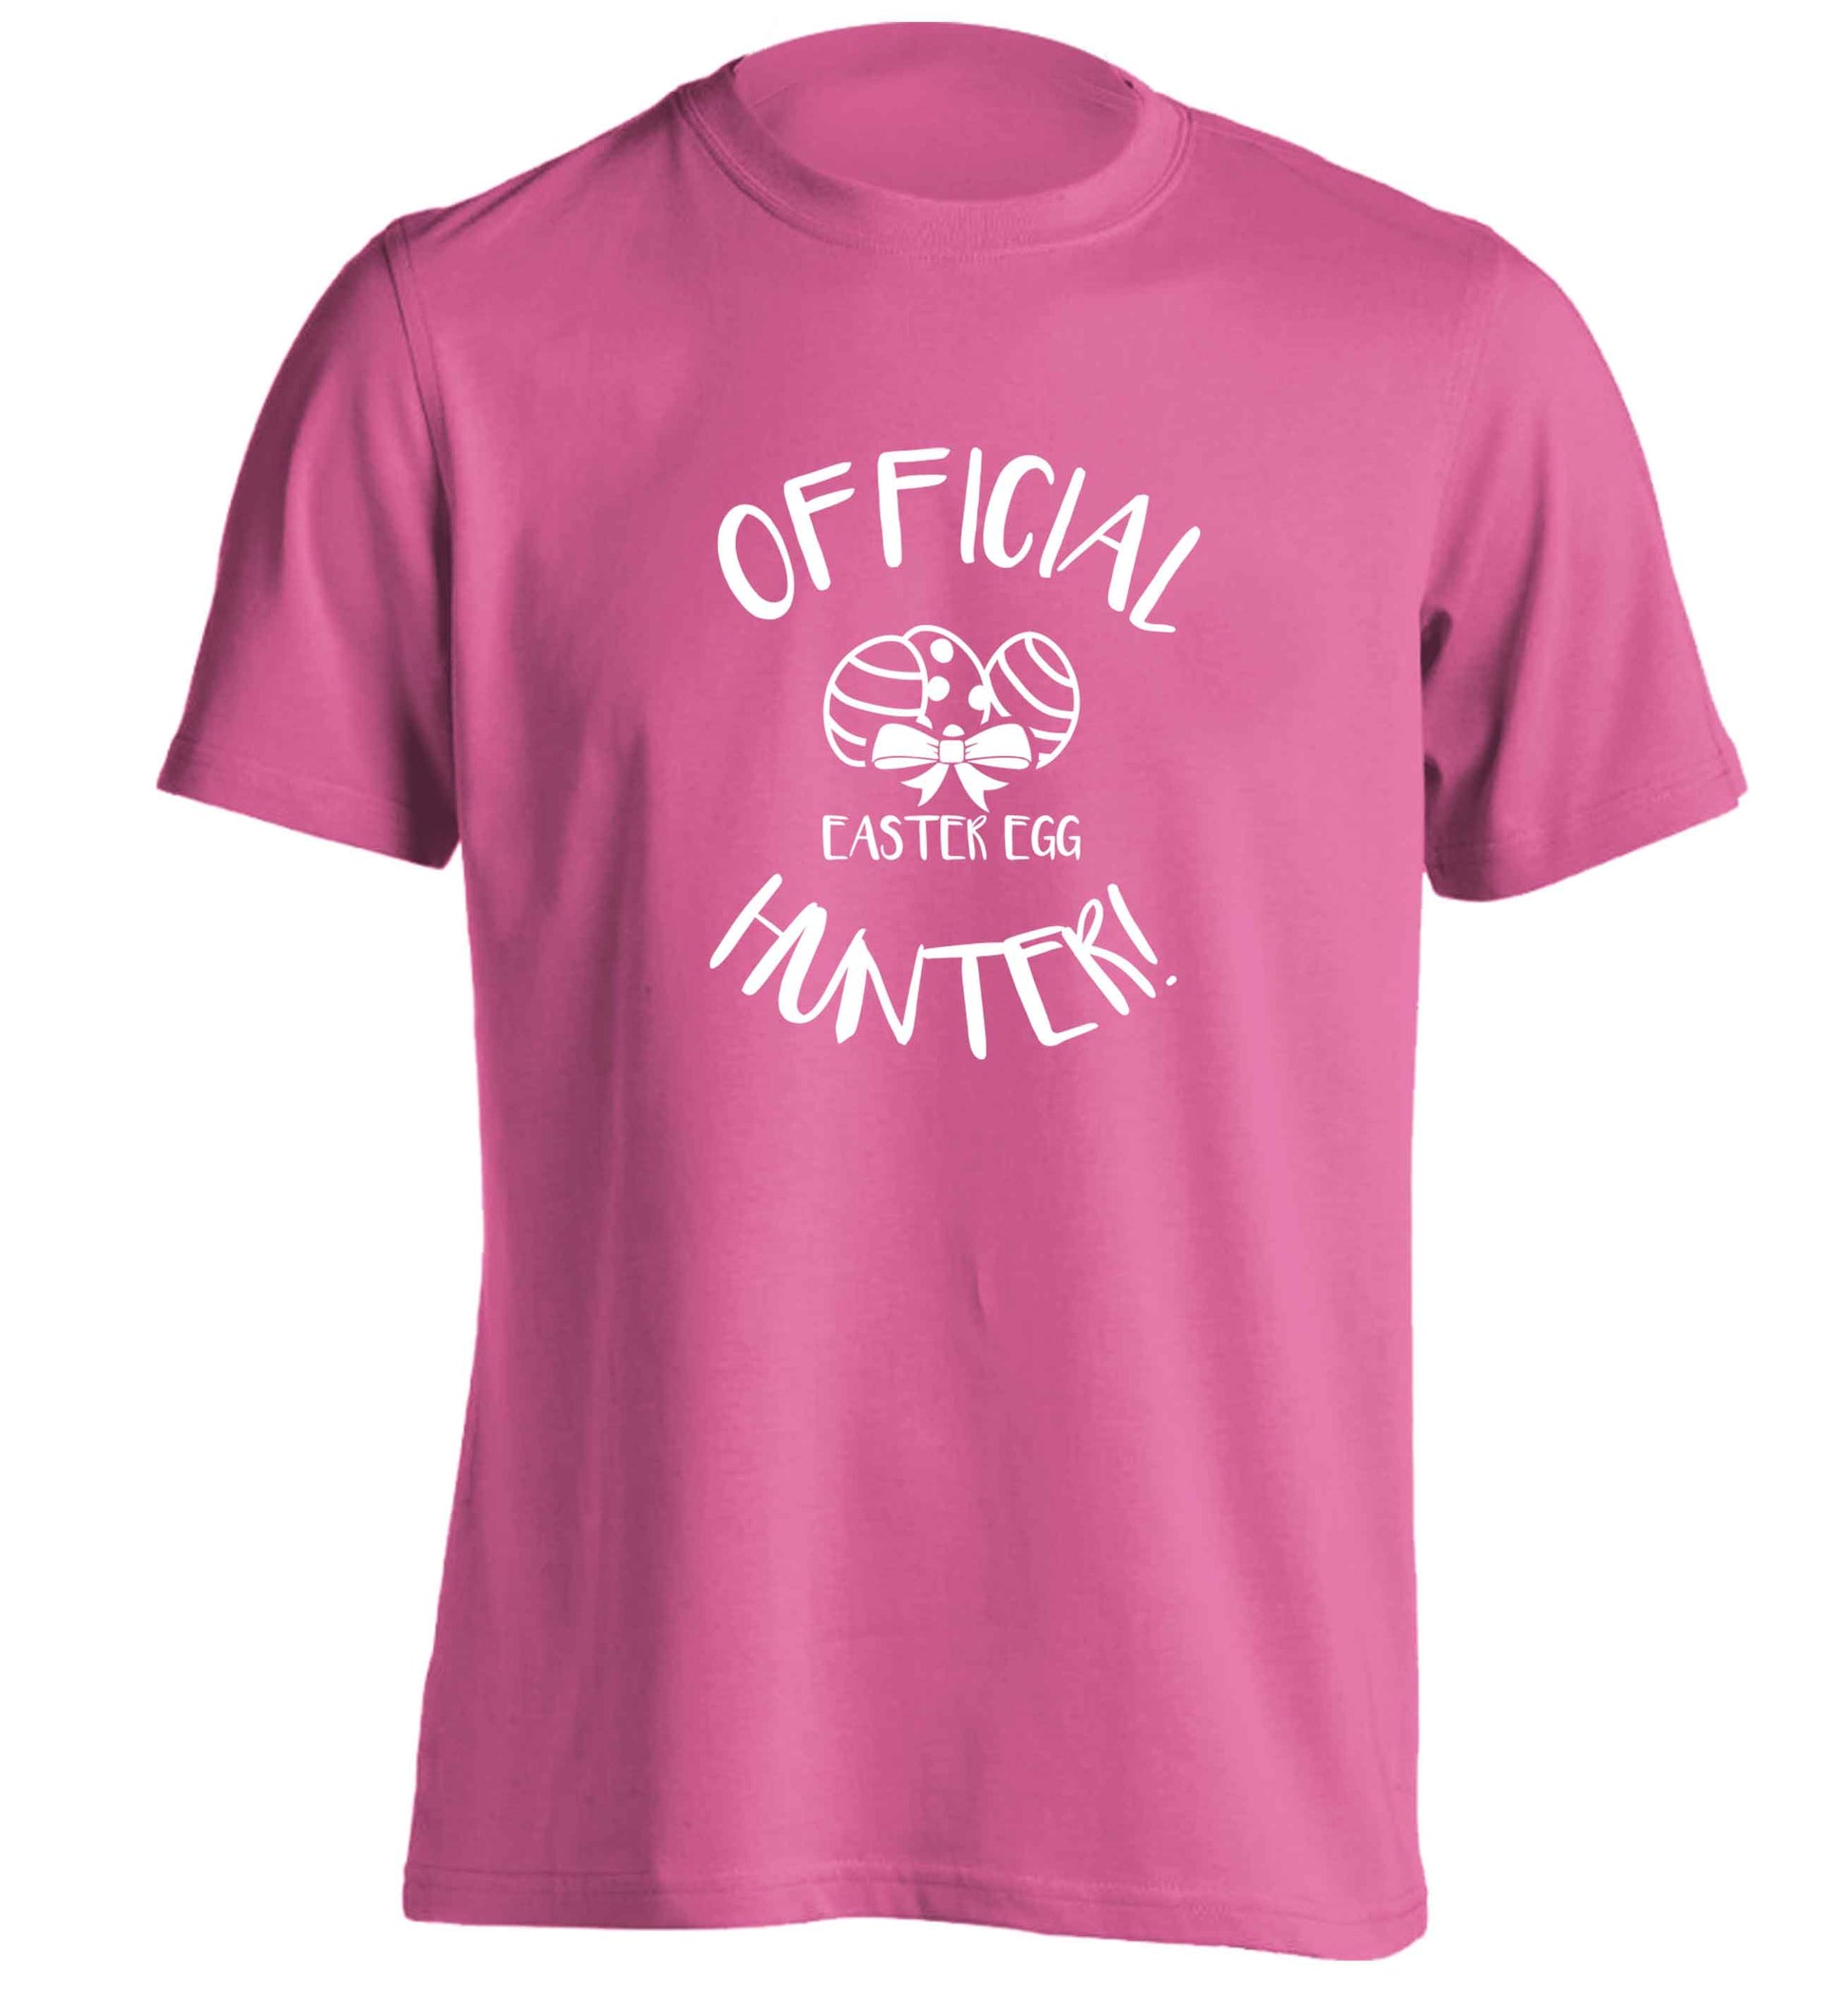 Official Easter egg hunter! adults unisex pink Tshirt 2XL